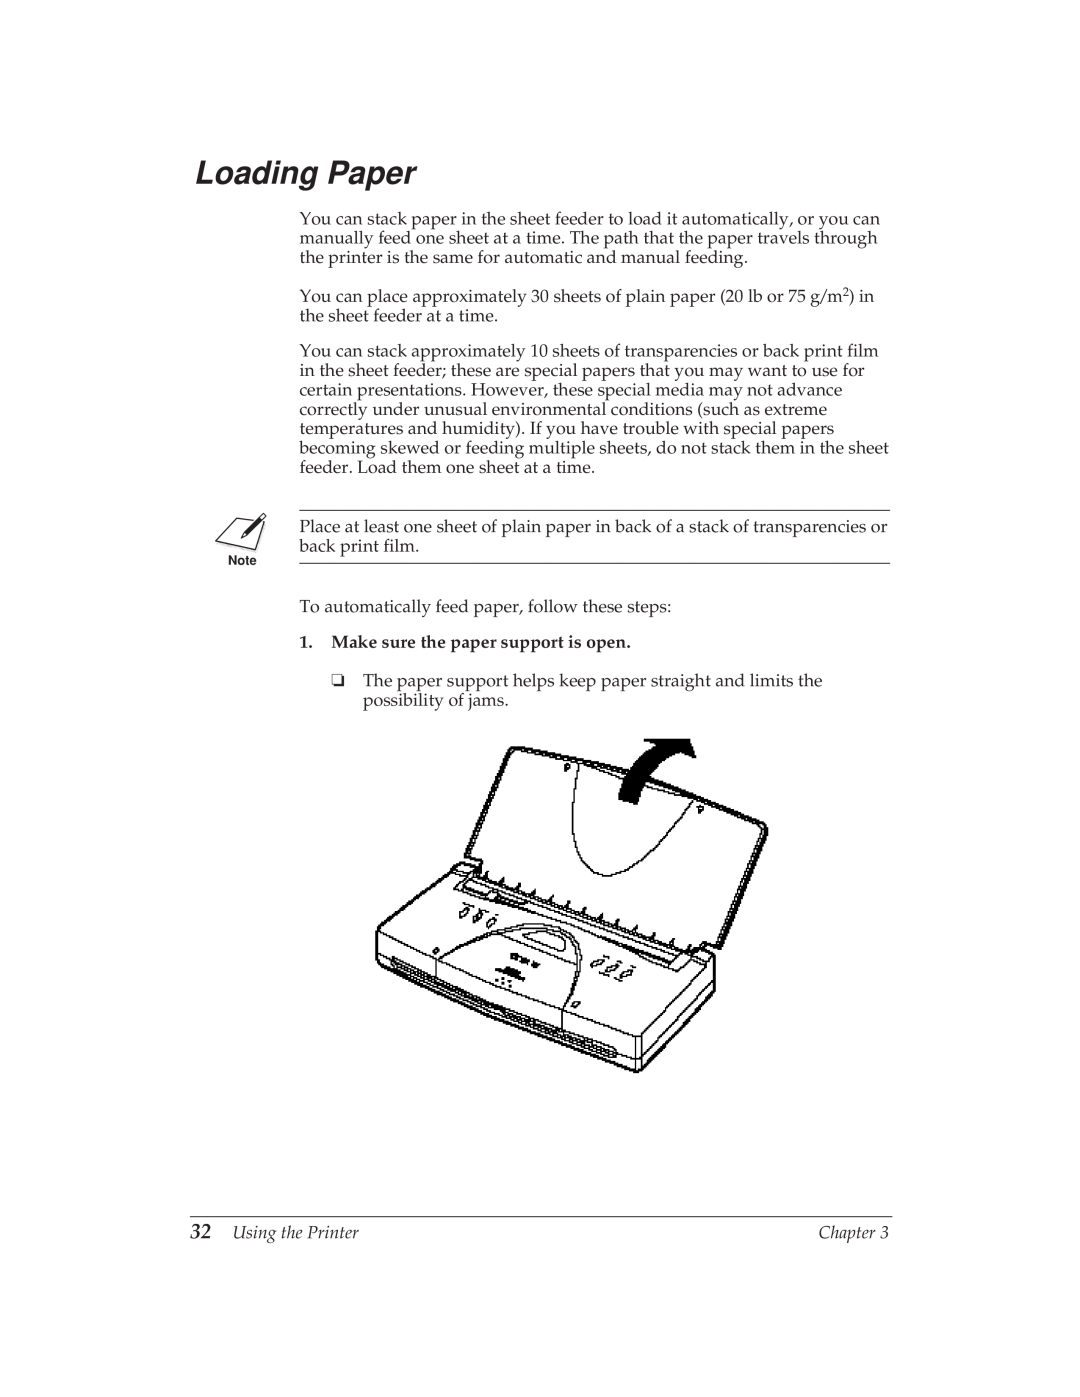 Canon BJ-30 manual Loading Paper, Make sure the paper support is open 